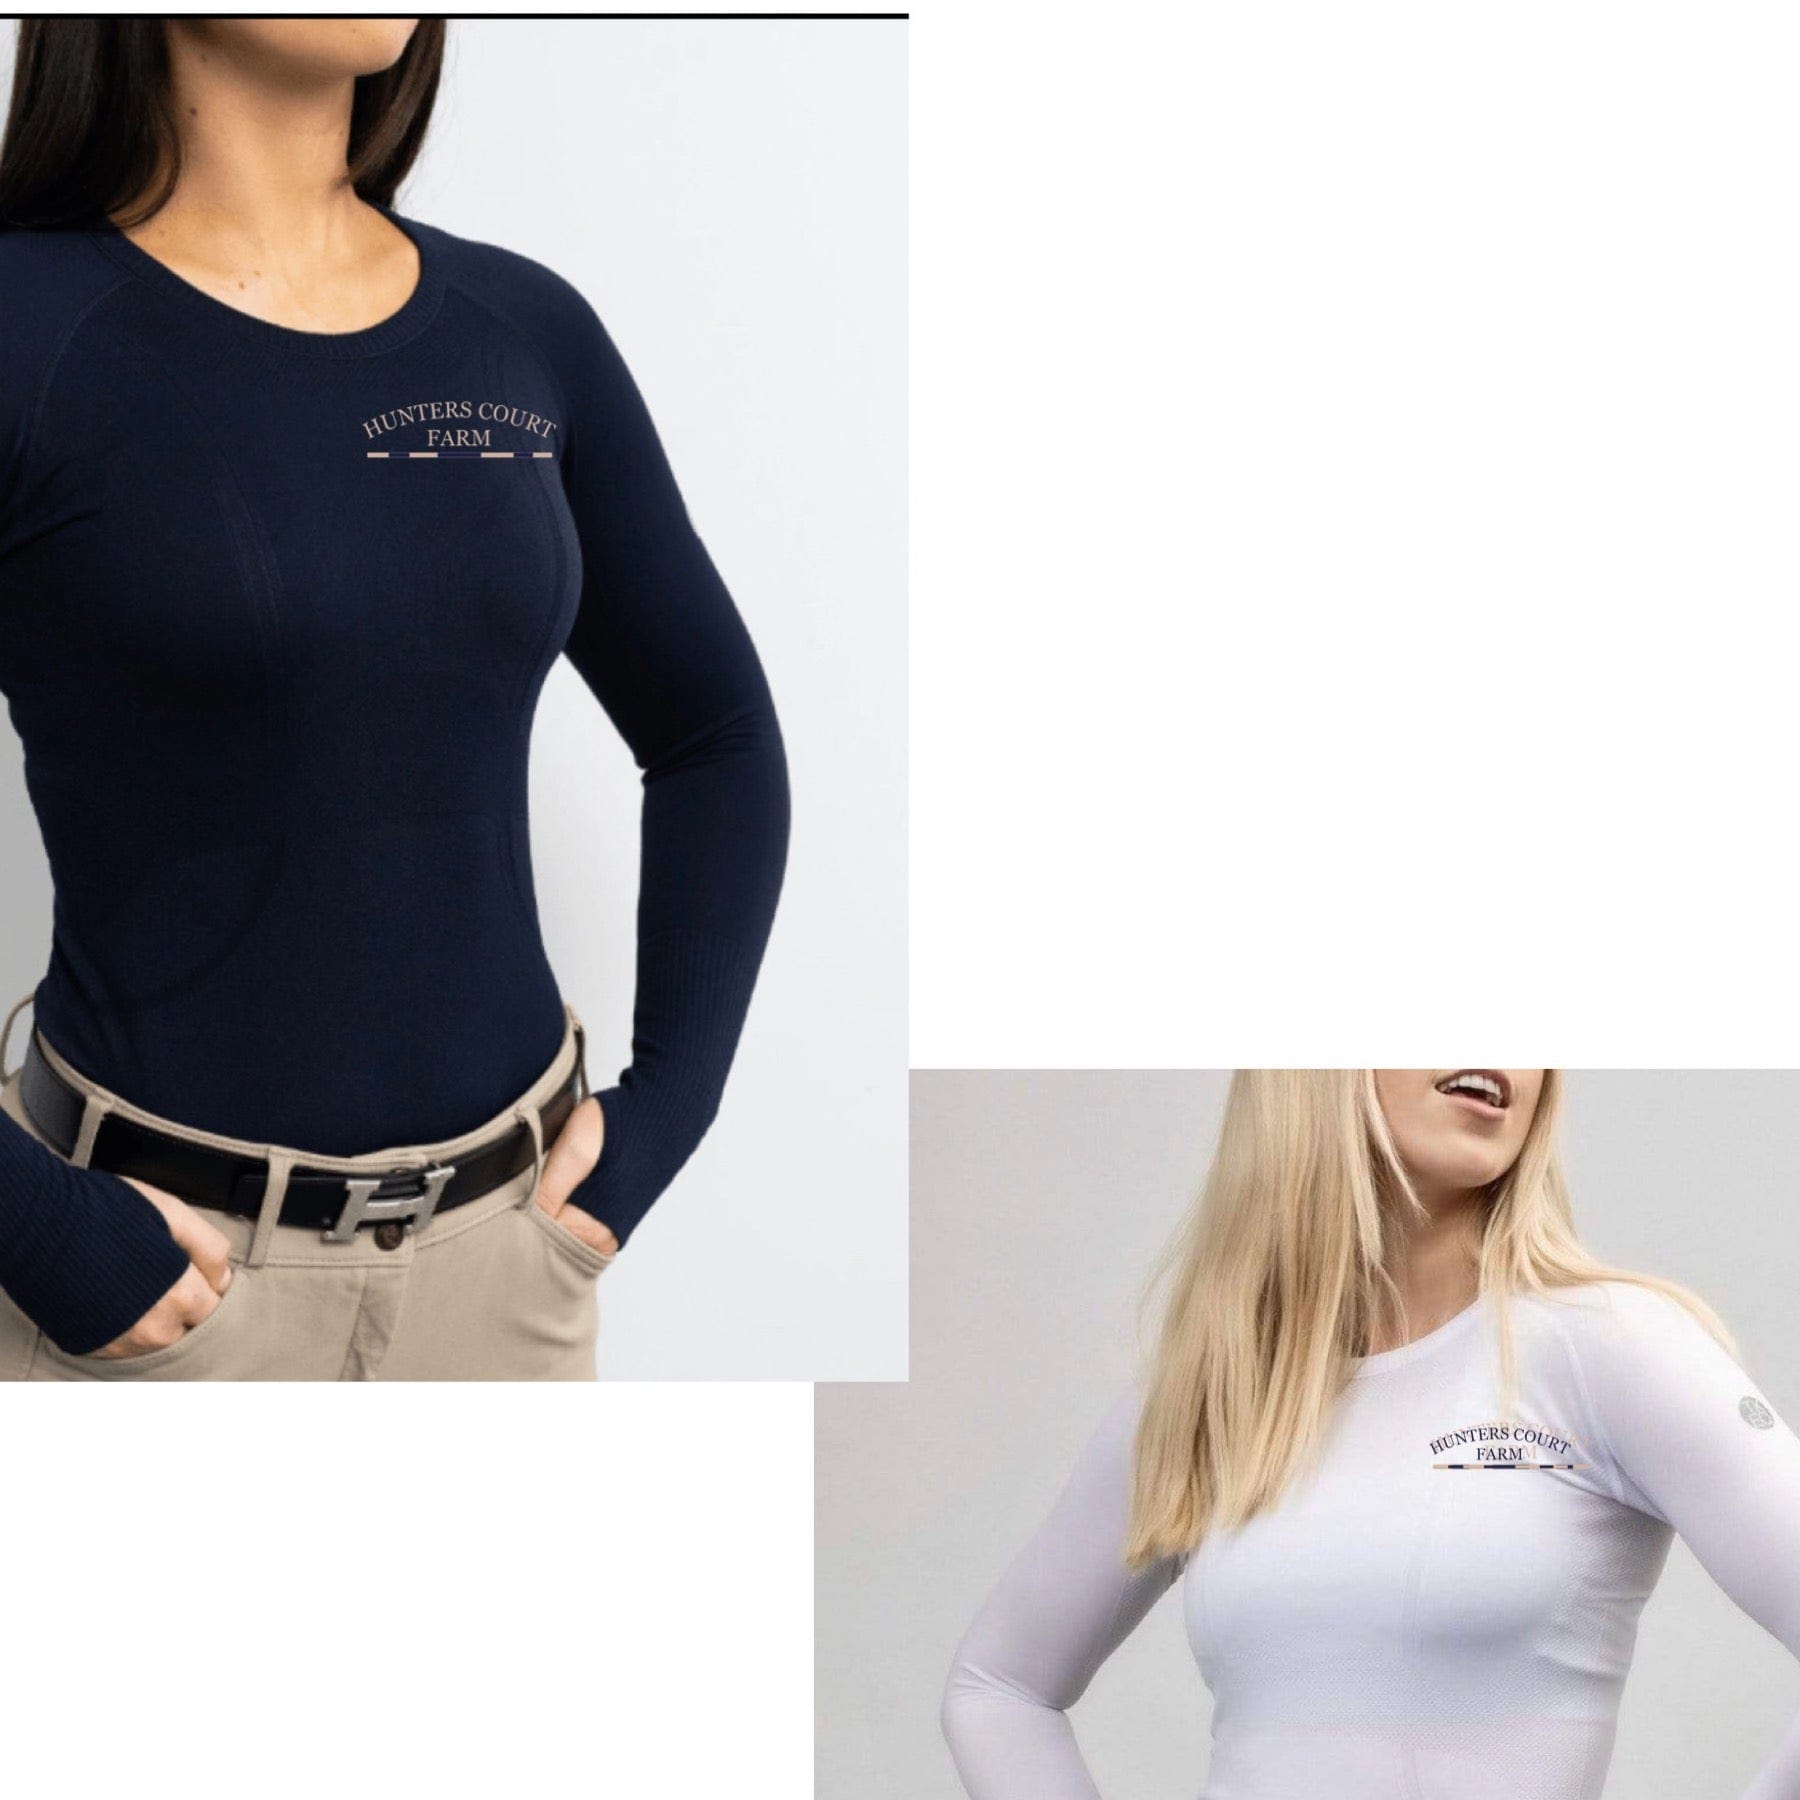 Equestrian Team Apparel Hunters Court Farm TKEQ tech shirt equestrian team apparel online tack store mobile tack store custom farm apparel custom show stable clothing equestrian lifestyle horse show clothing riding clothes horses equestrian tack store